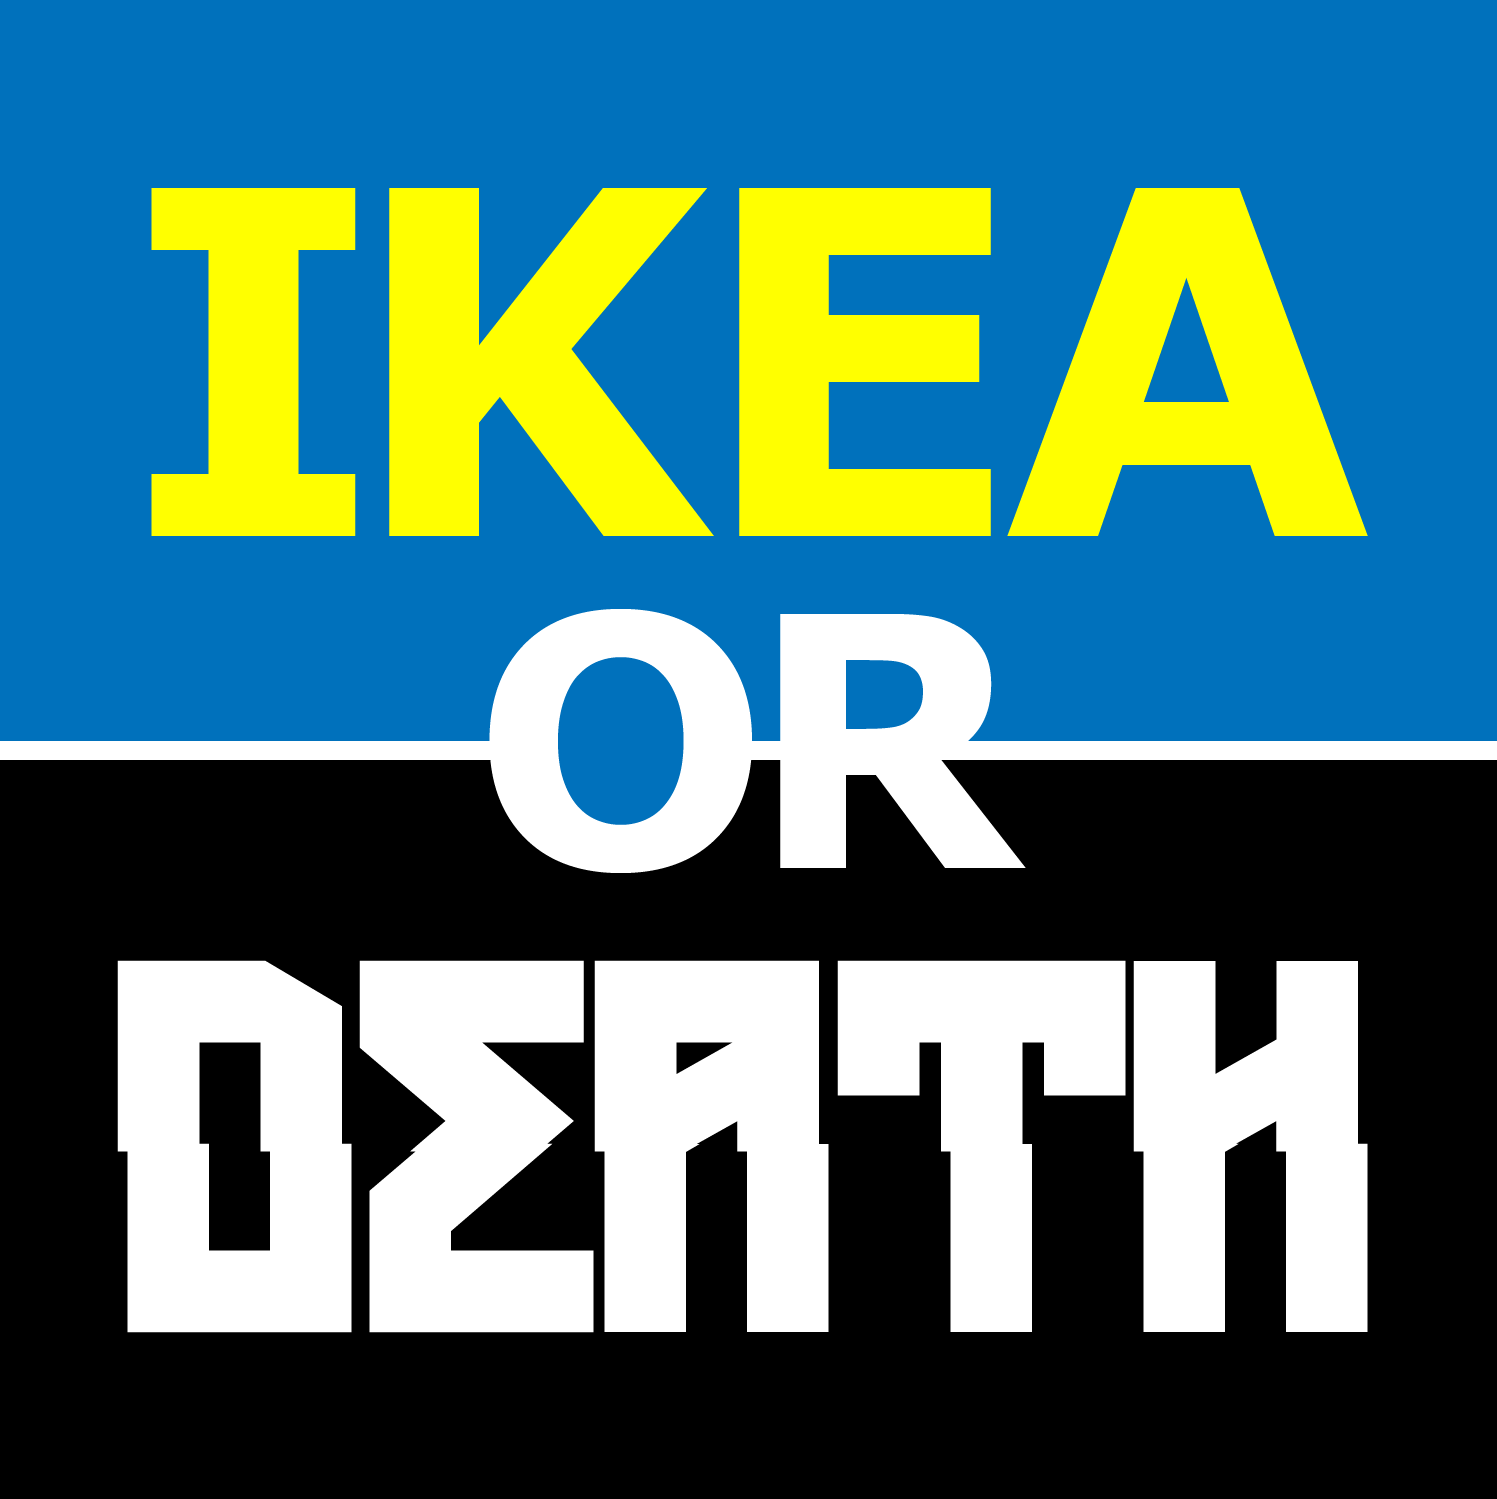 Is It An IKEA Product Or A Death Metal Band?